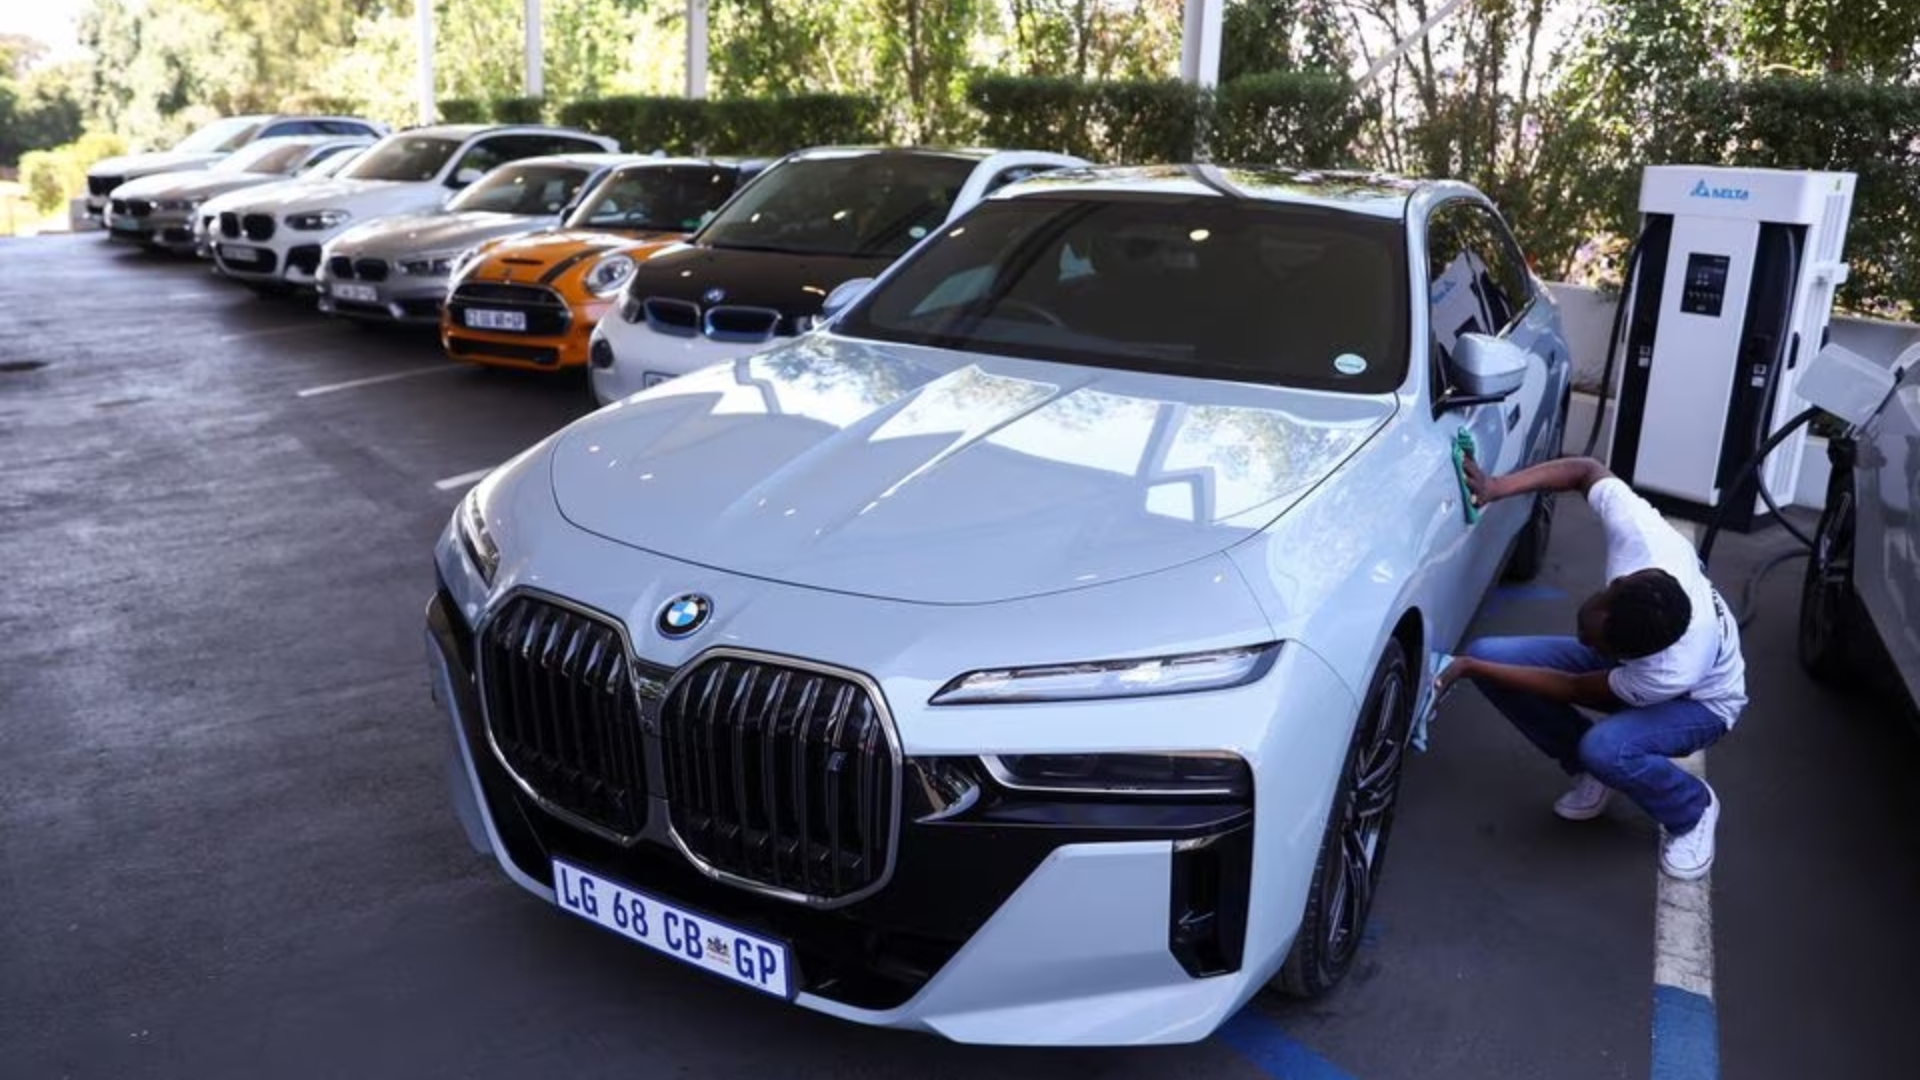 BMW says 'no interest' in price war as order books bulge